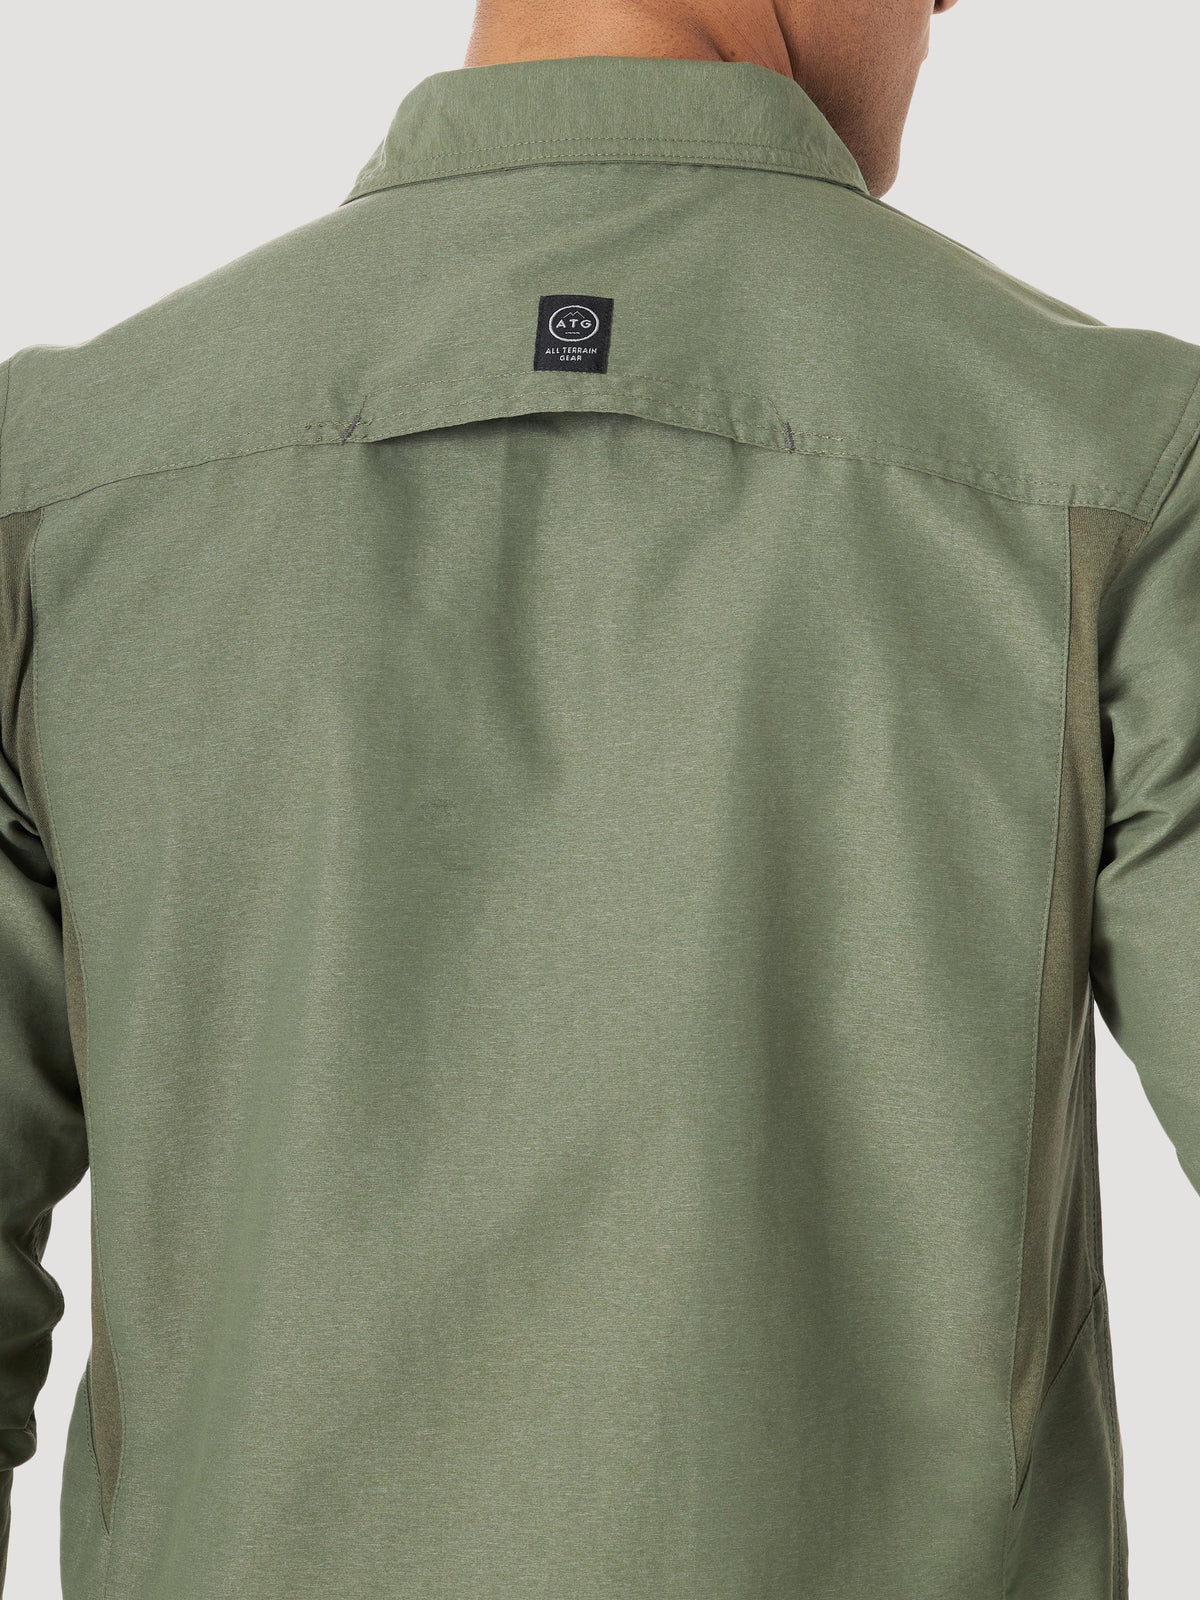 All Terrain Gear Mixed Material Shirt in Dusty Olive